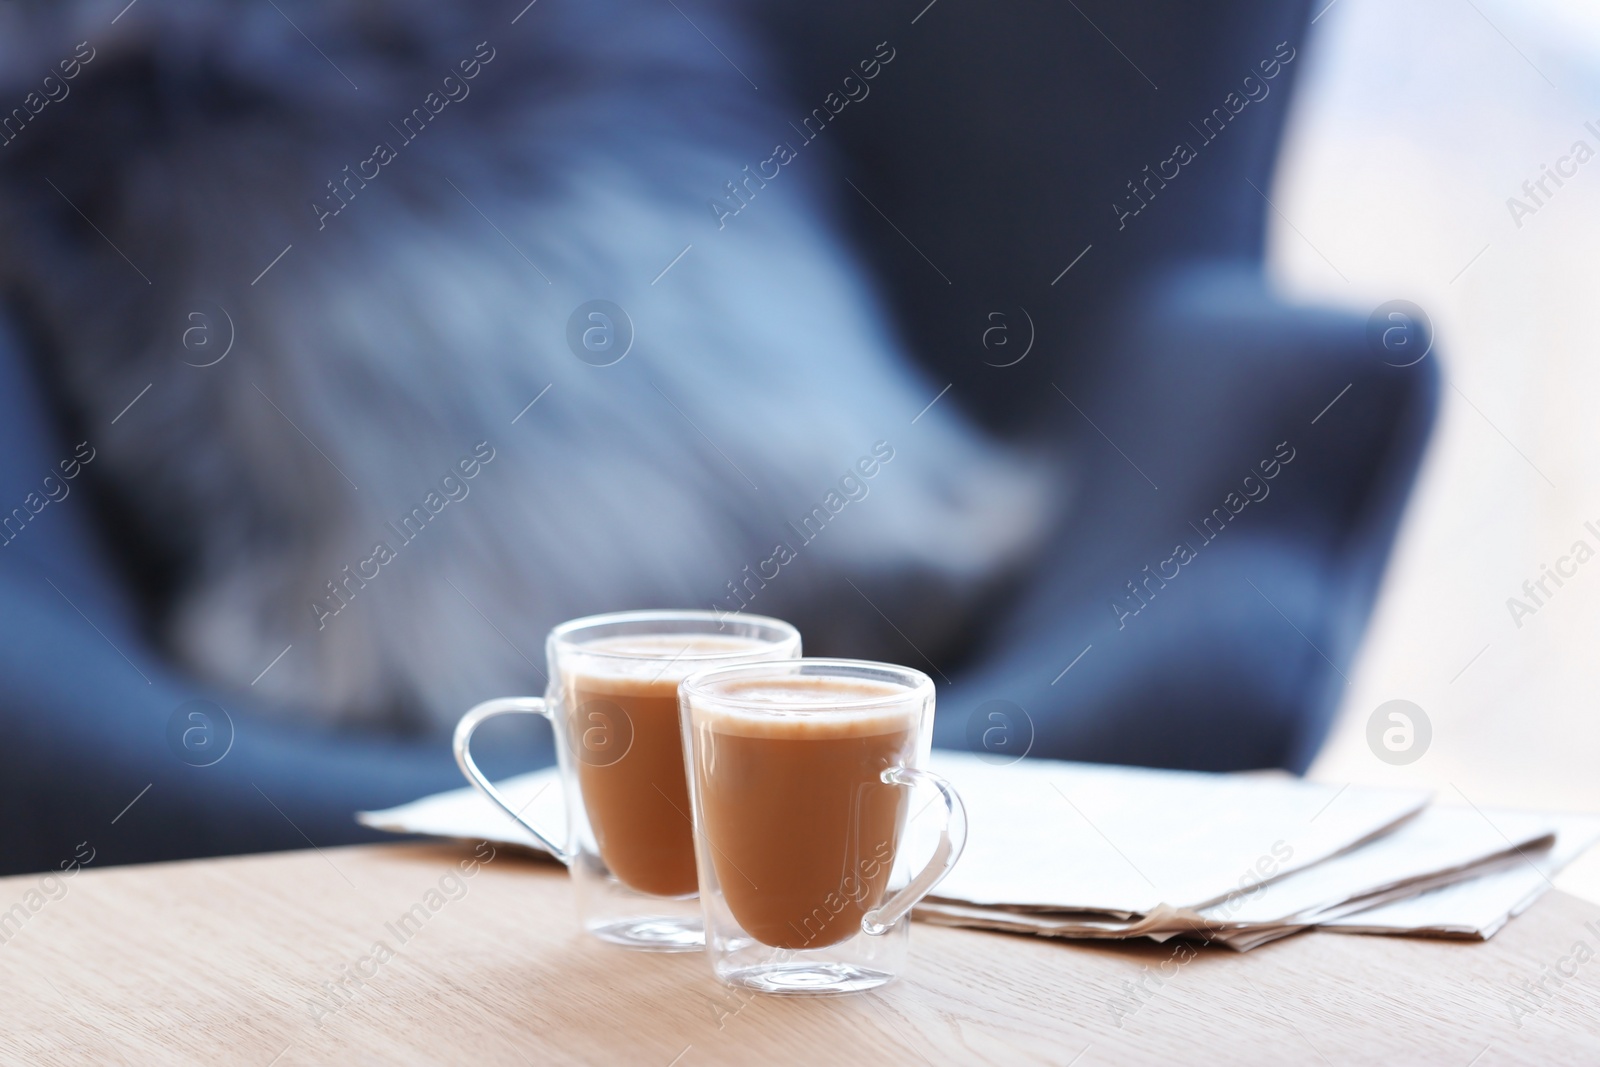 Photo of Cups of coffee and papers on table